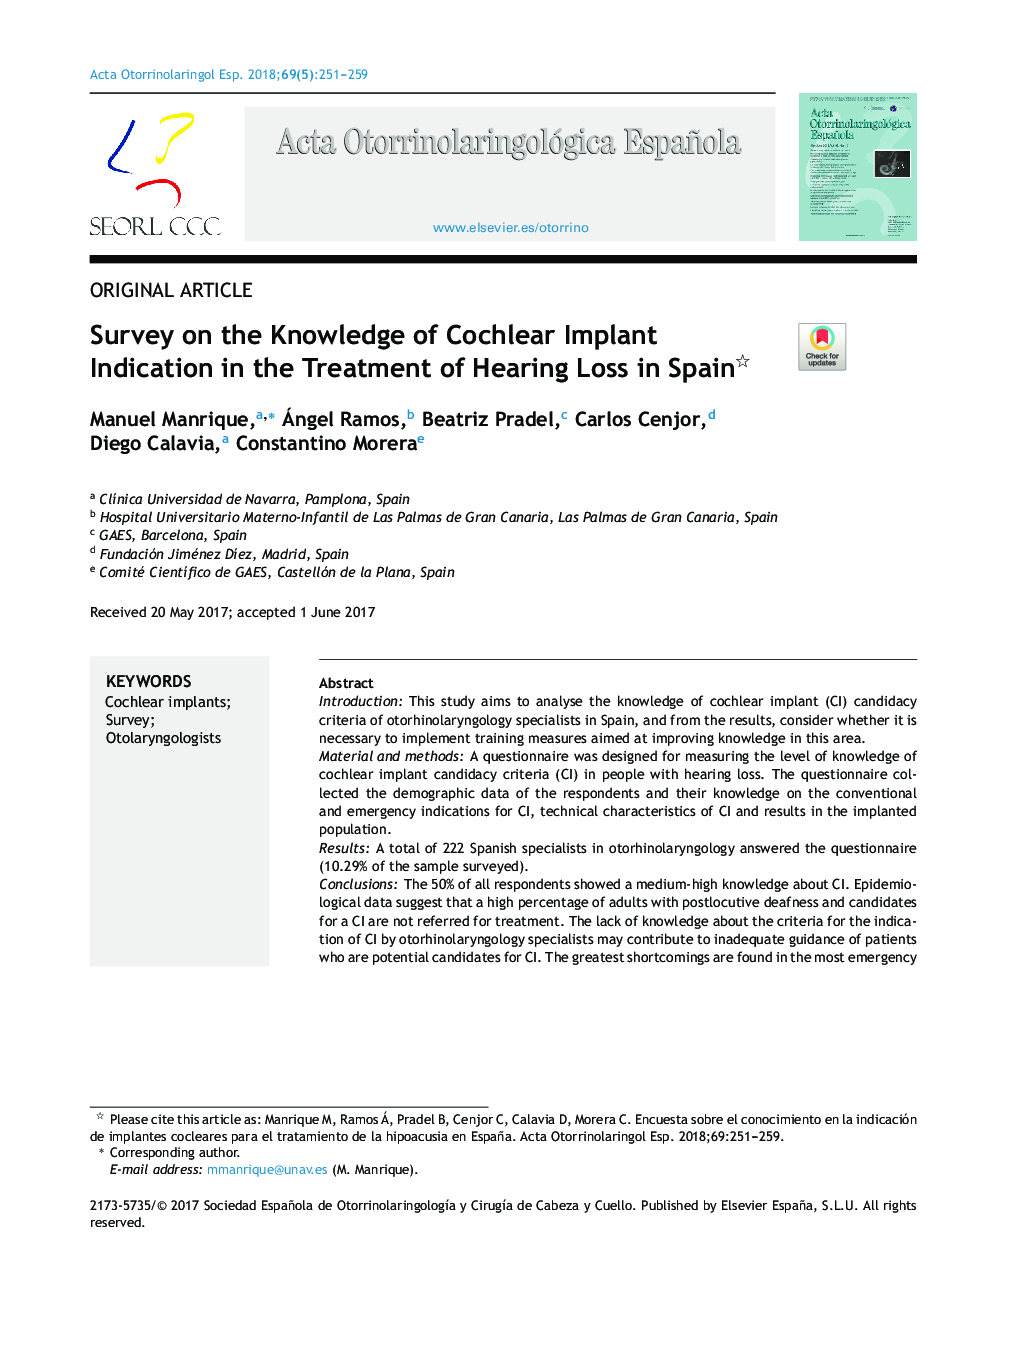 Survey on the Knowledge of Cochlear Implant Indication in the Treatment of Hearing Loss in Spain